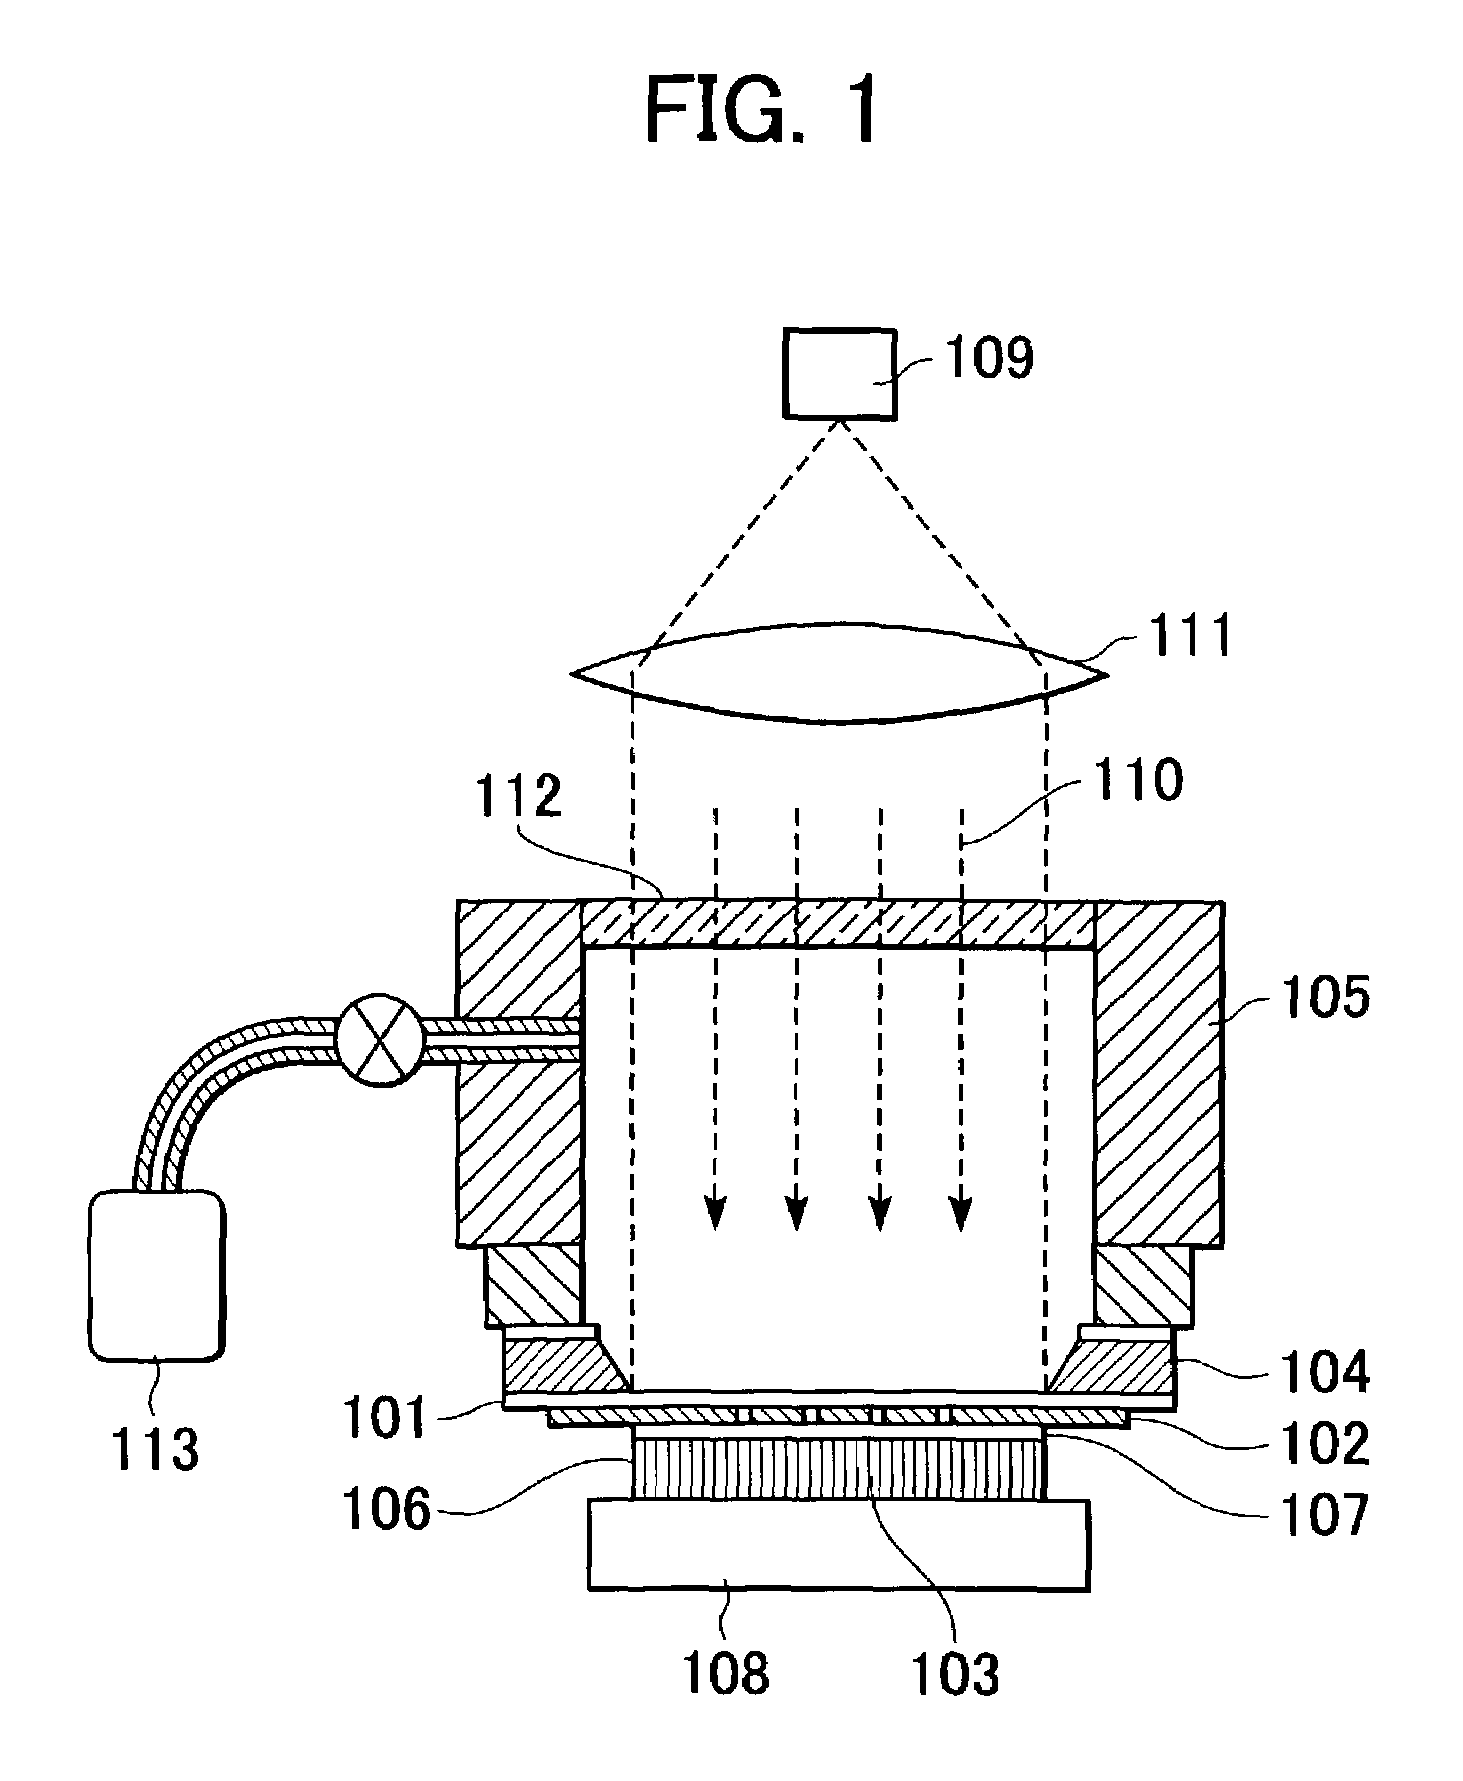 Photomask for near-field exposure and exposure apparatus including the photomask for making a pattern